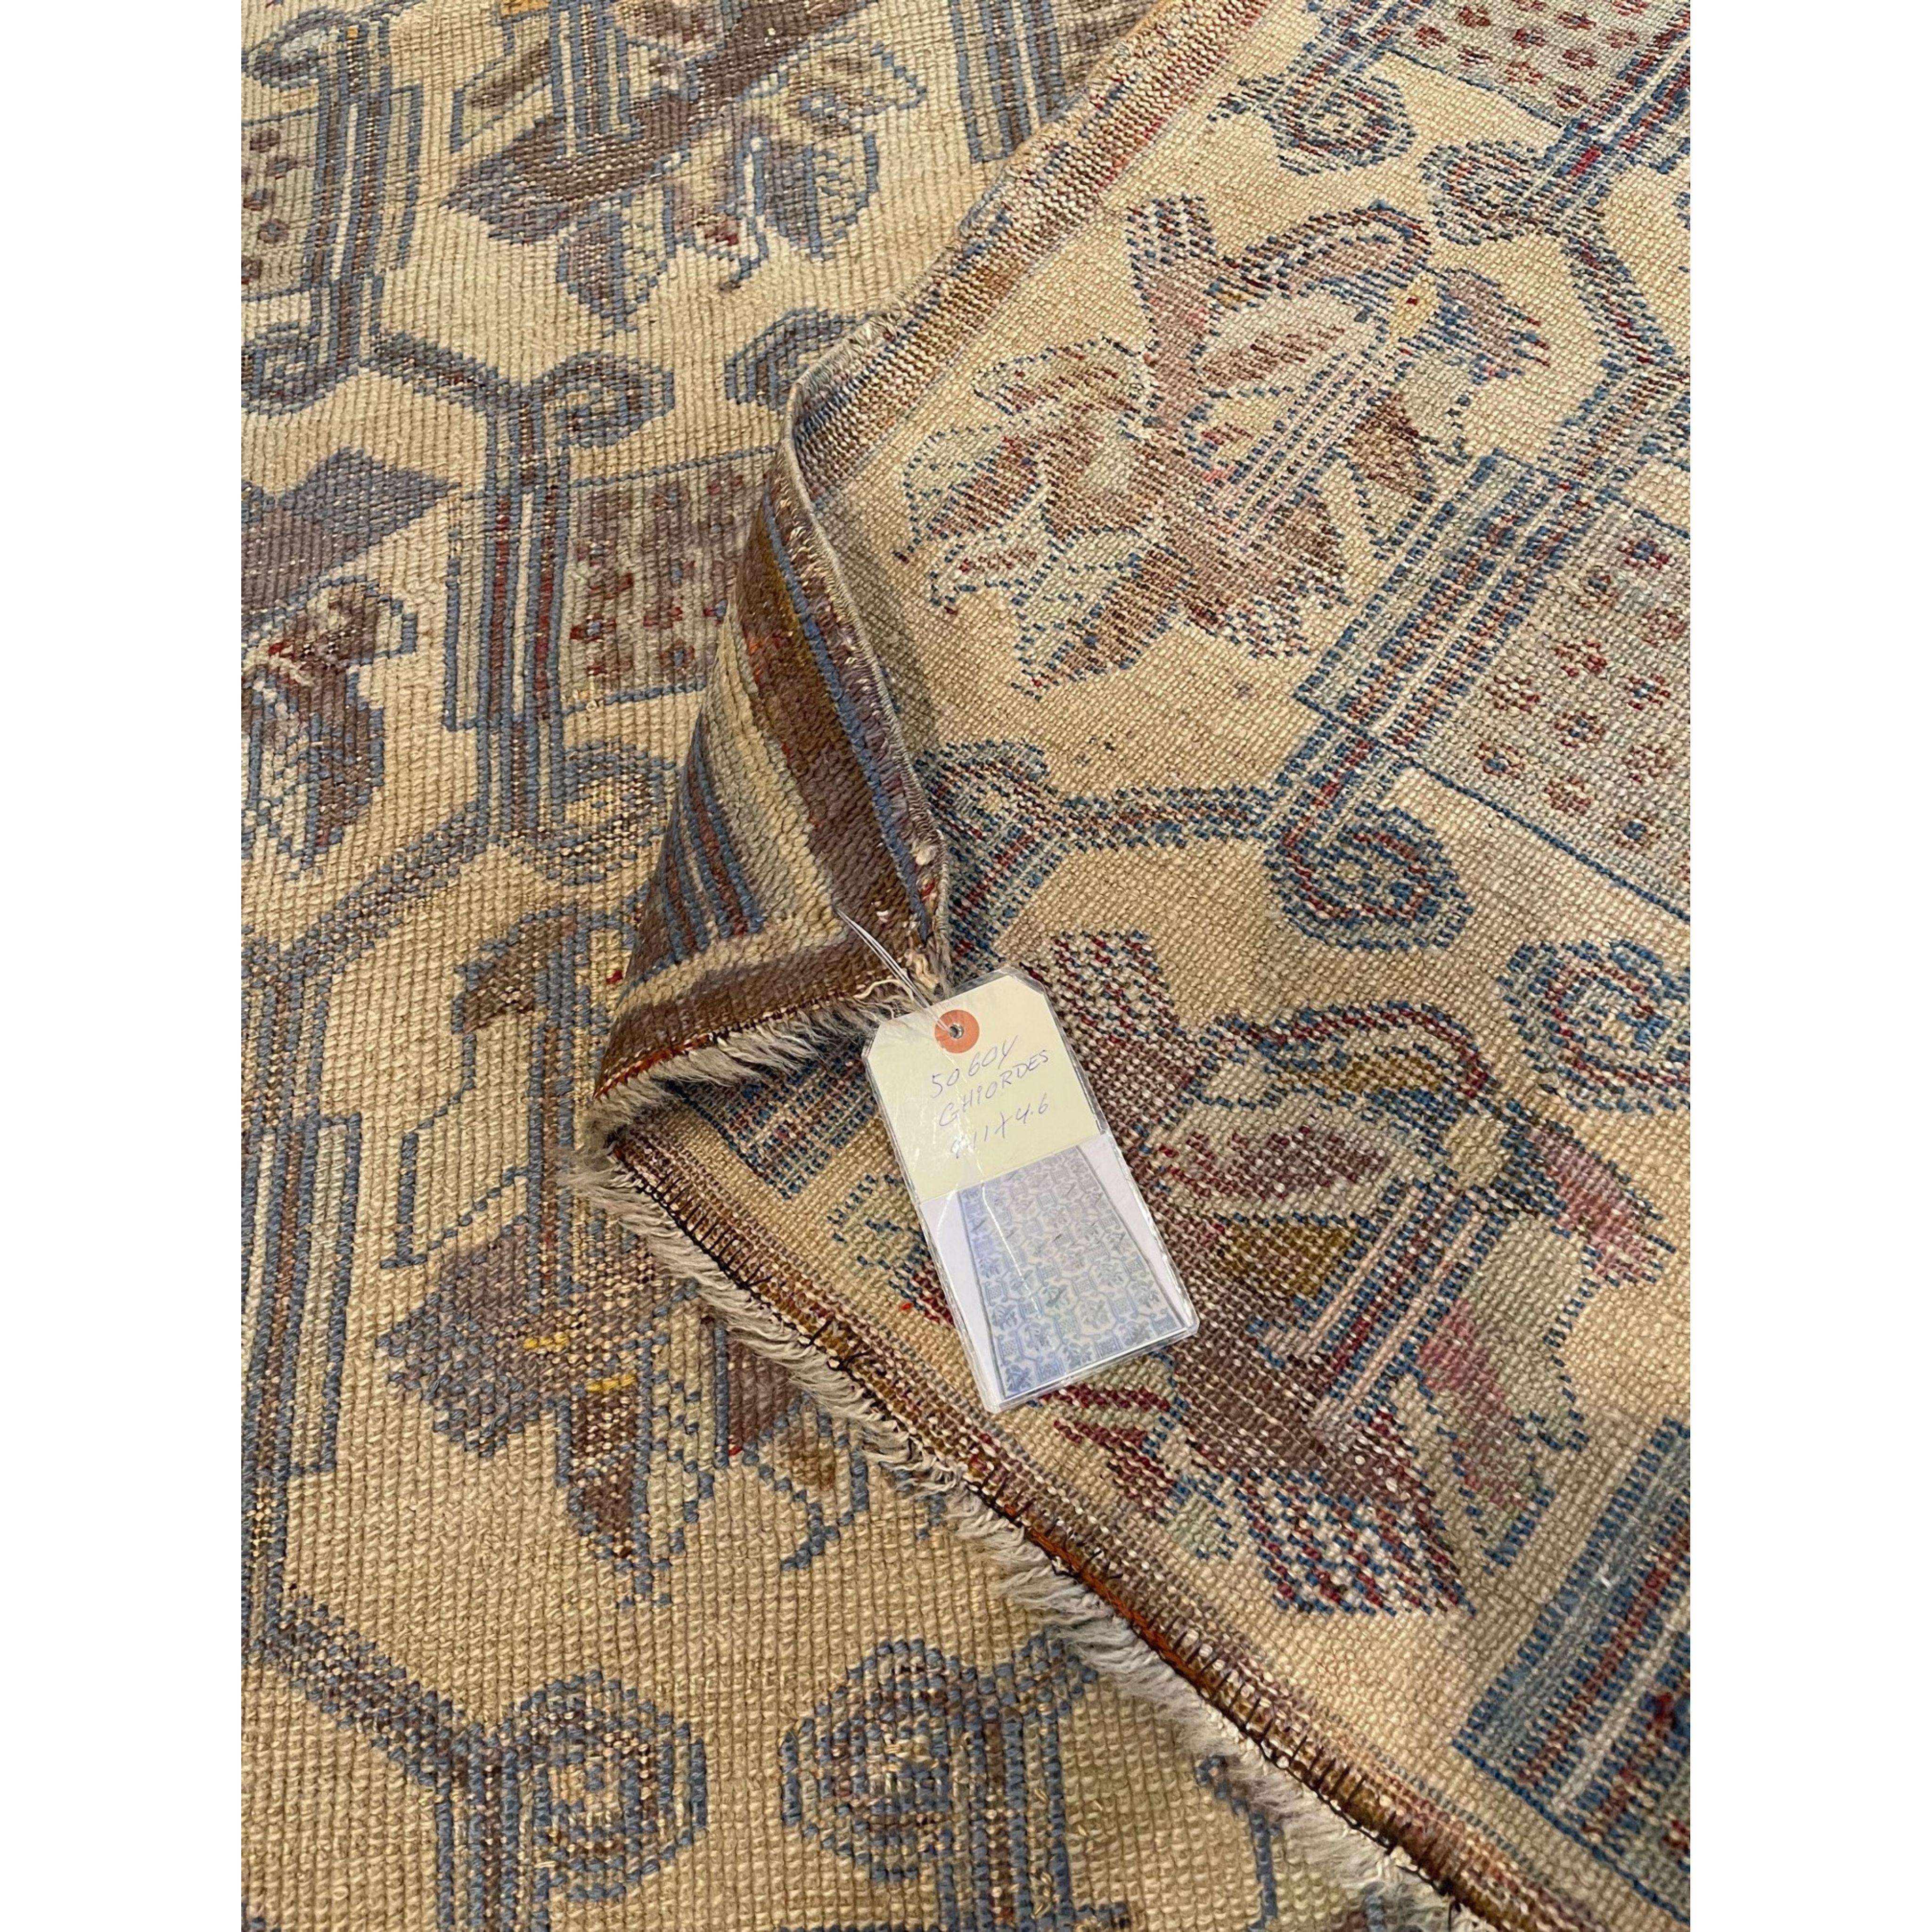 Other Antique Ghiordes Rug 9.11x4.6 For Sale